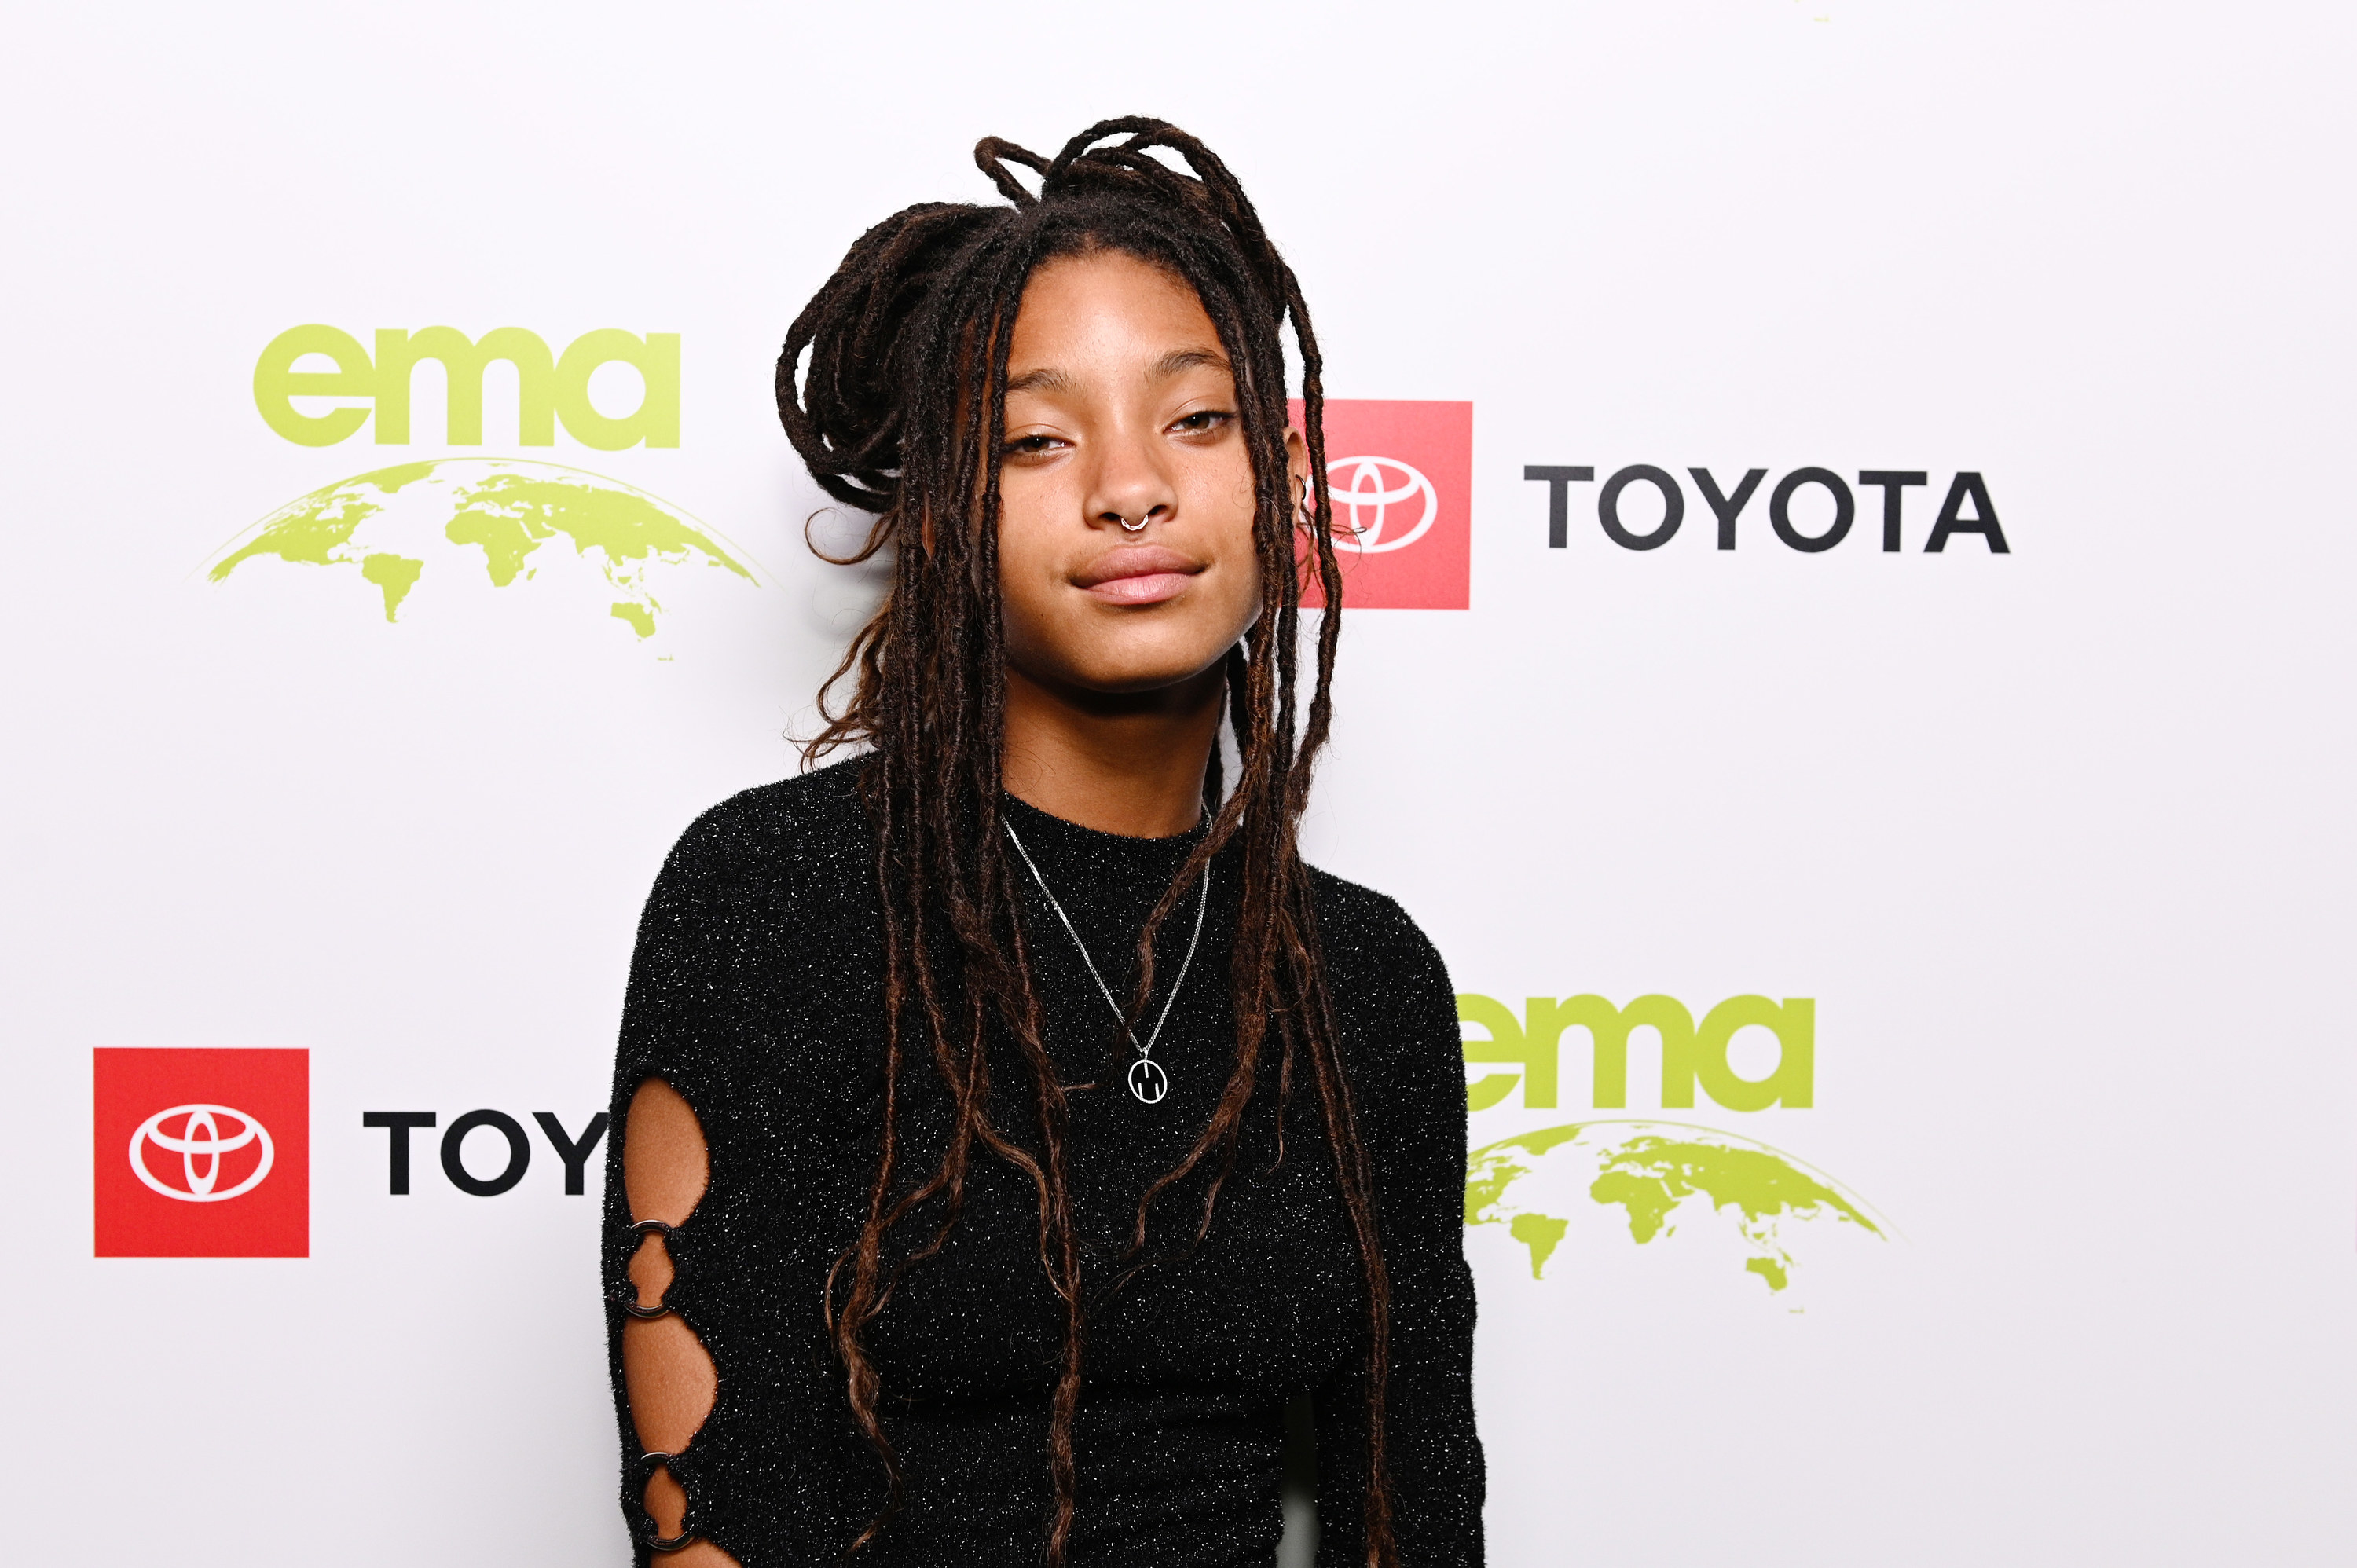 Willow Smith is photographed at an event in 2019